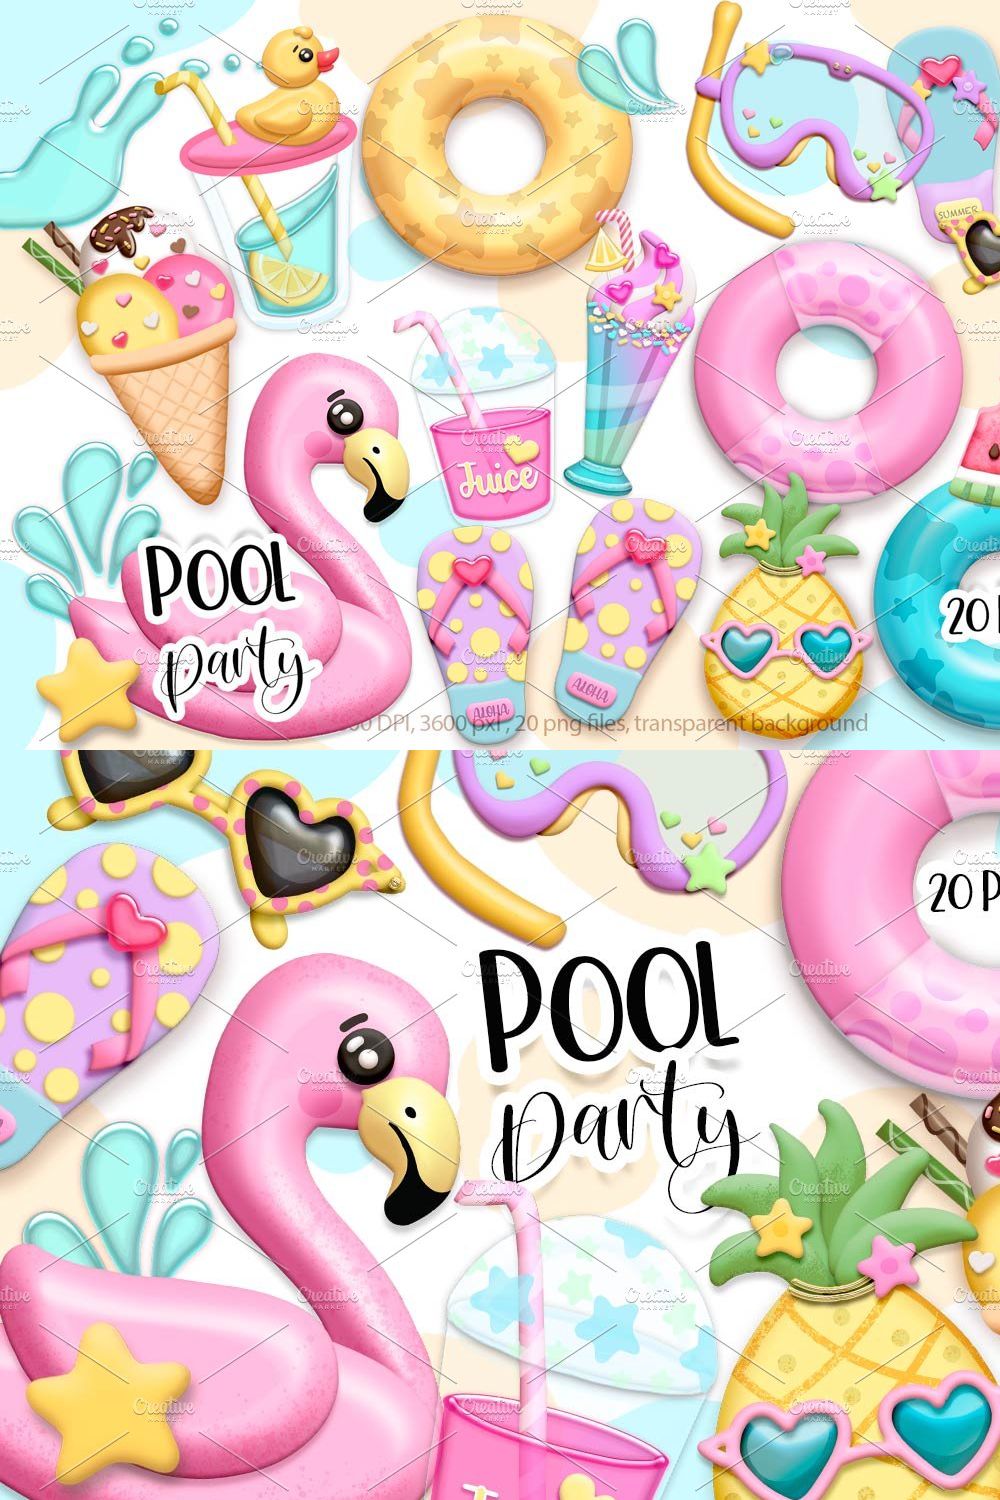 Pool party clipart pinterest preview image.